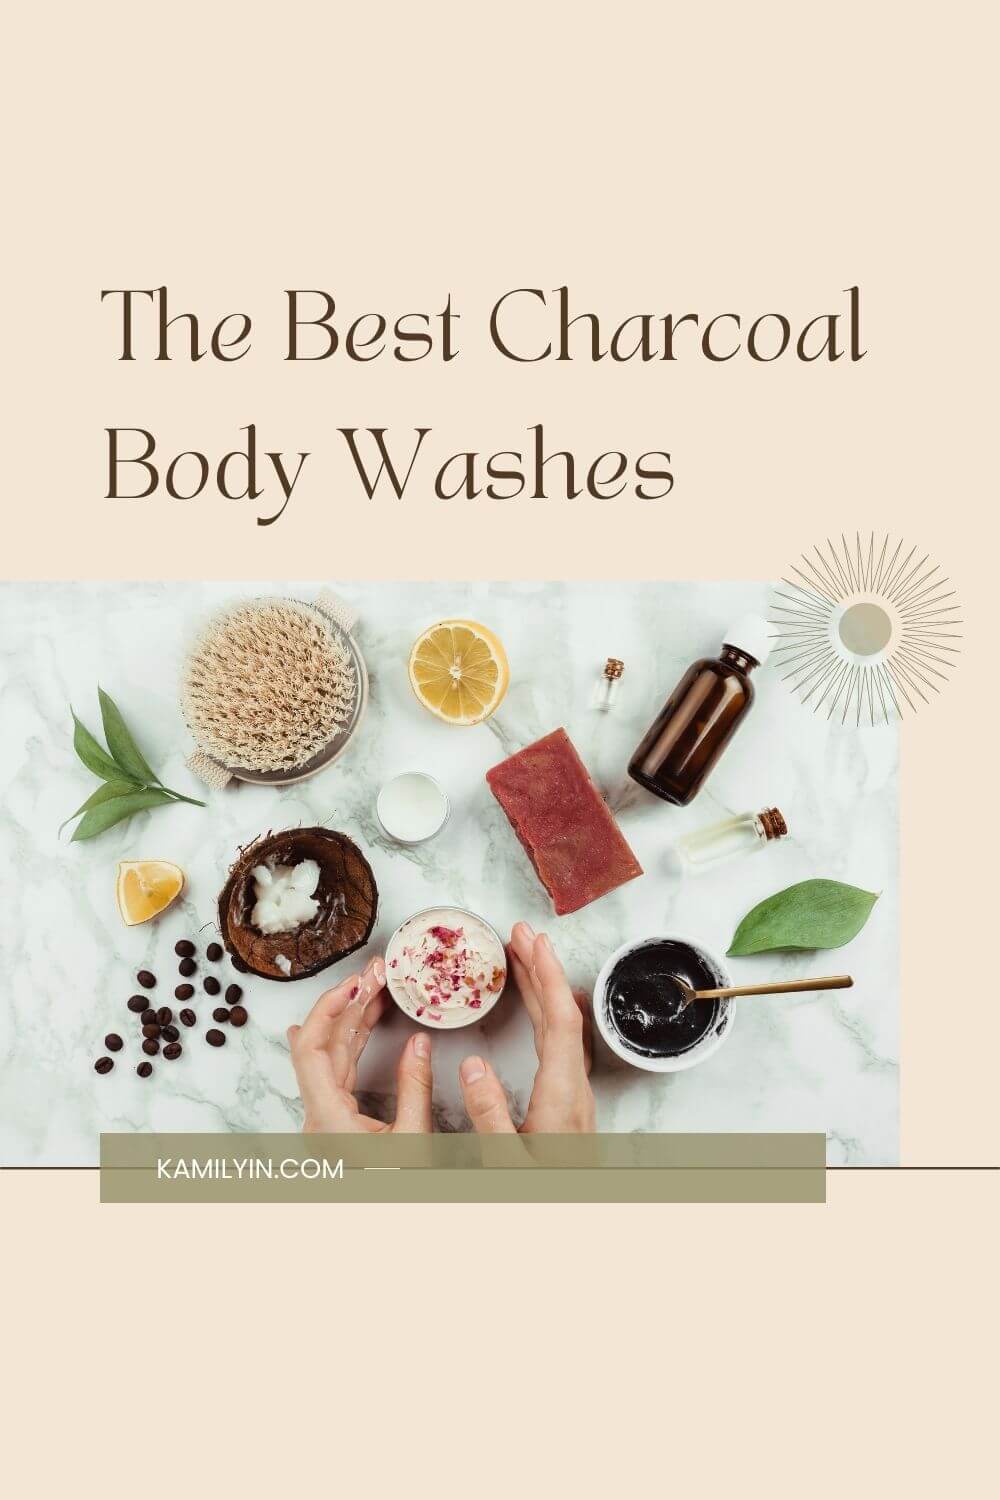 The Best Charcoal Body Washes